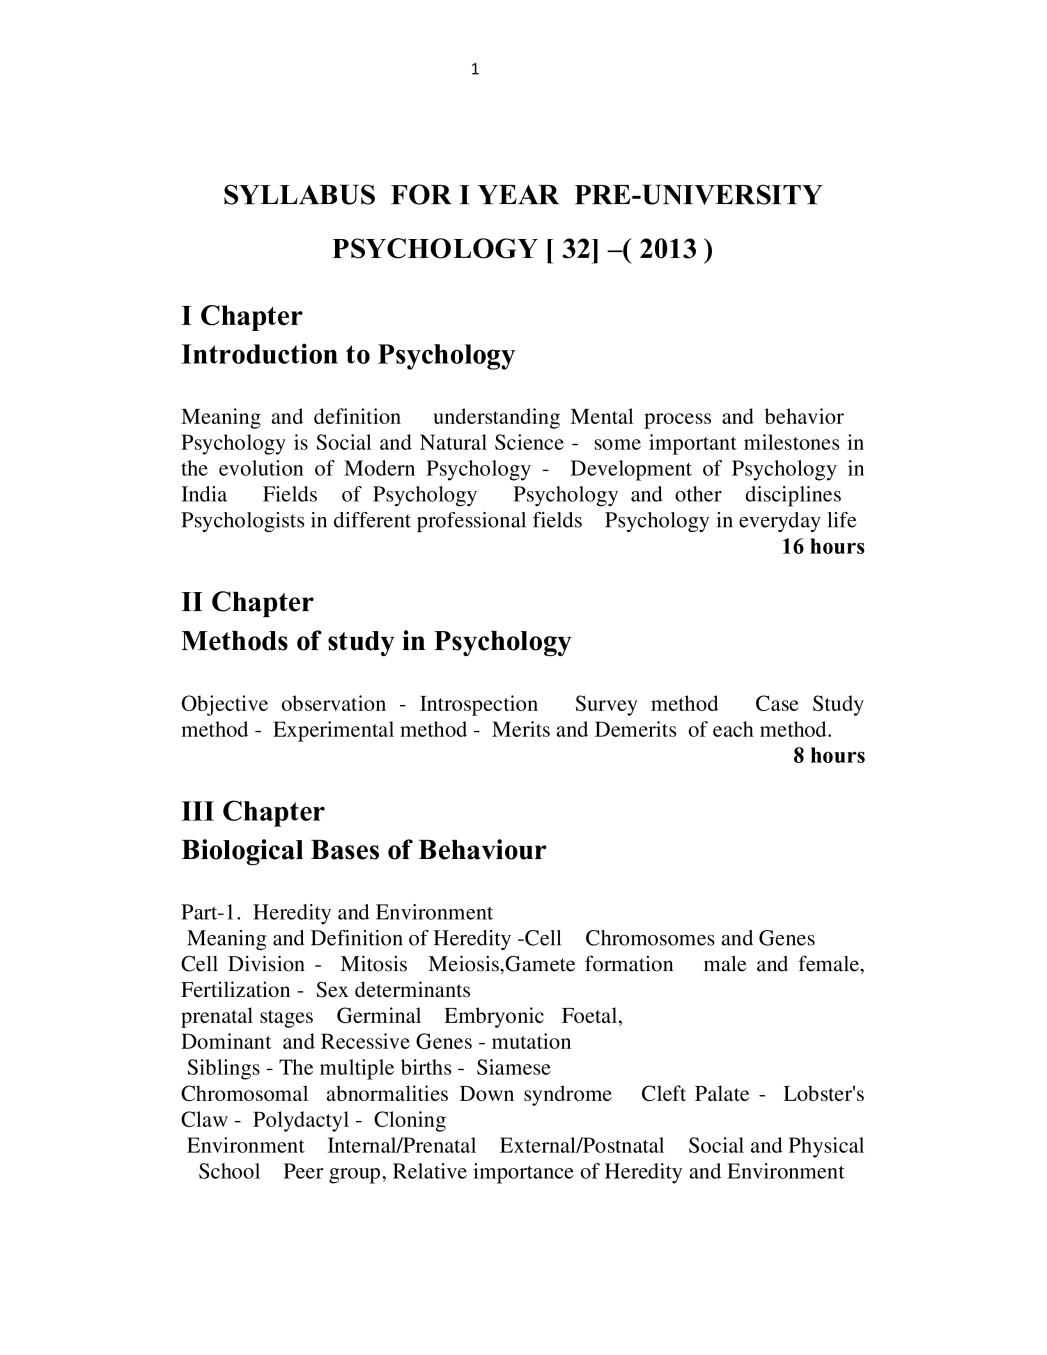 1st PUC Syllabus for Psychology - Page 1